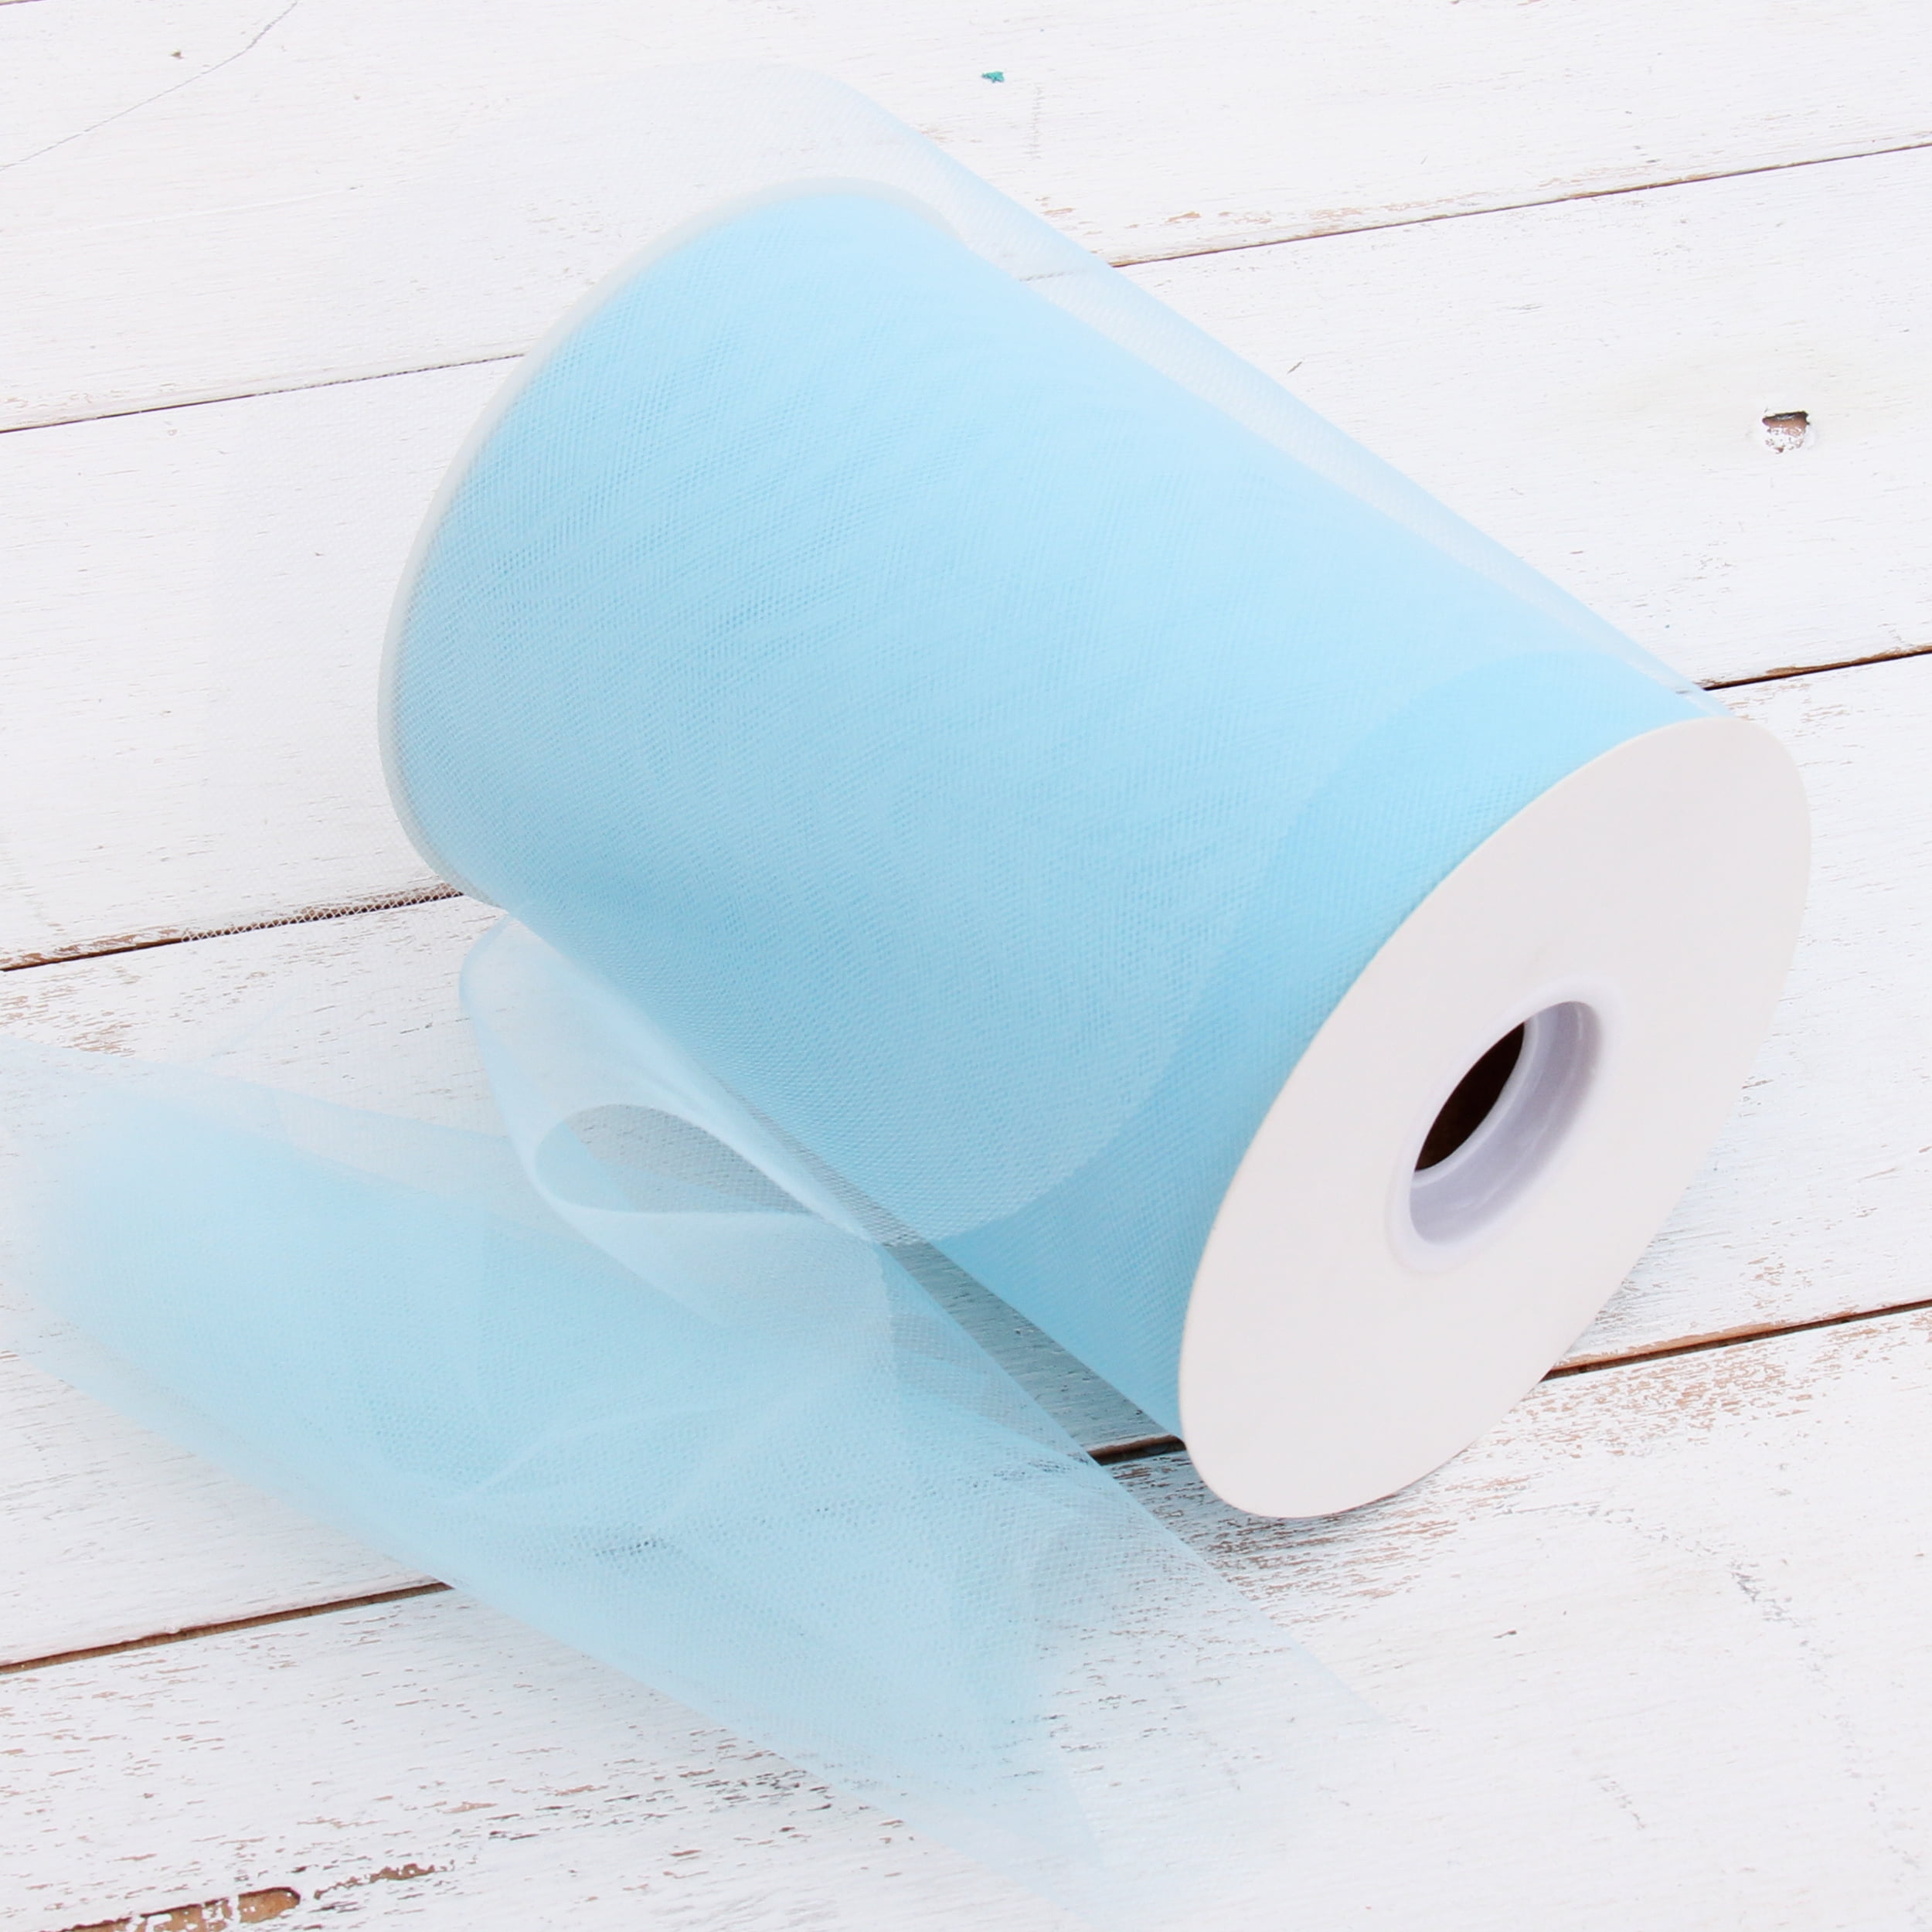 Light Blue Tulle Fabric Rolls 6 Inch by 100 Yards (300 feet) Fabric Spool  Tulle Ribbon for DIY Light Blue Tutu Bow Baby Shower Birthday Party Easter